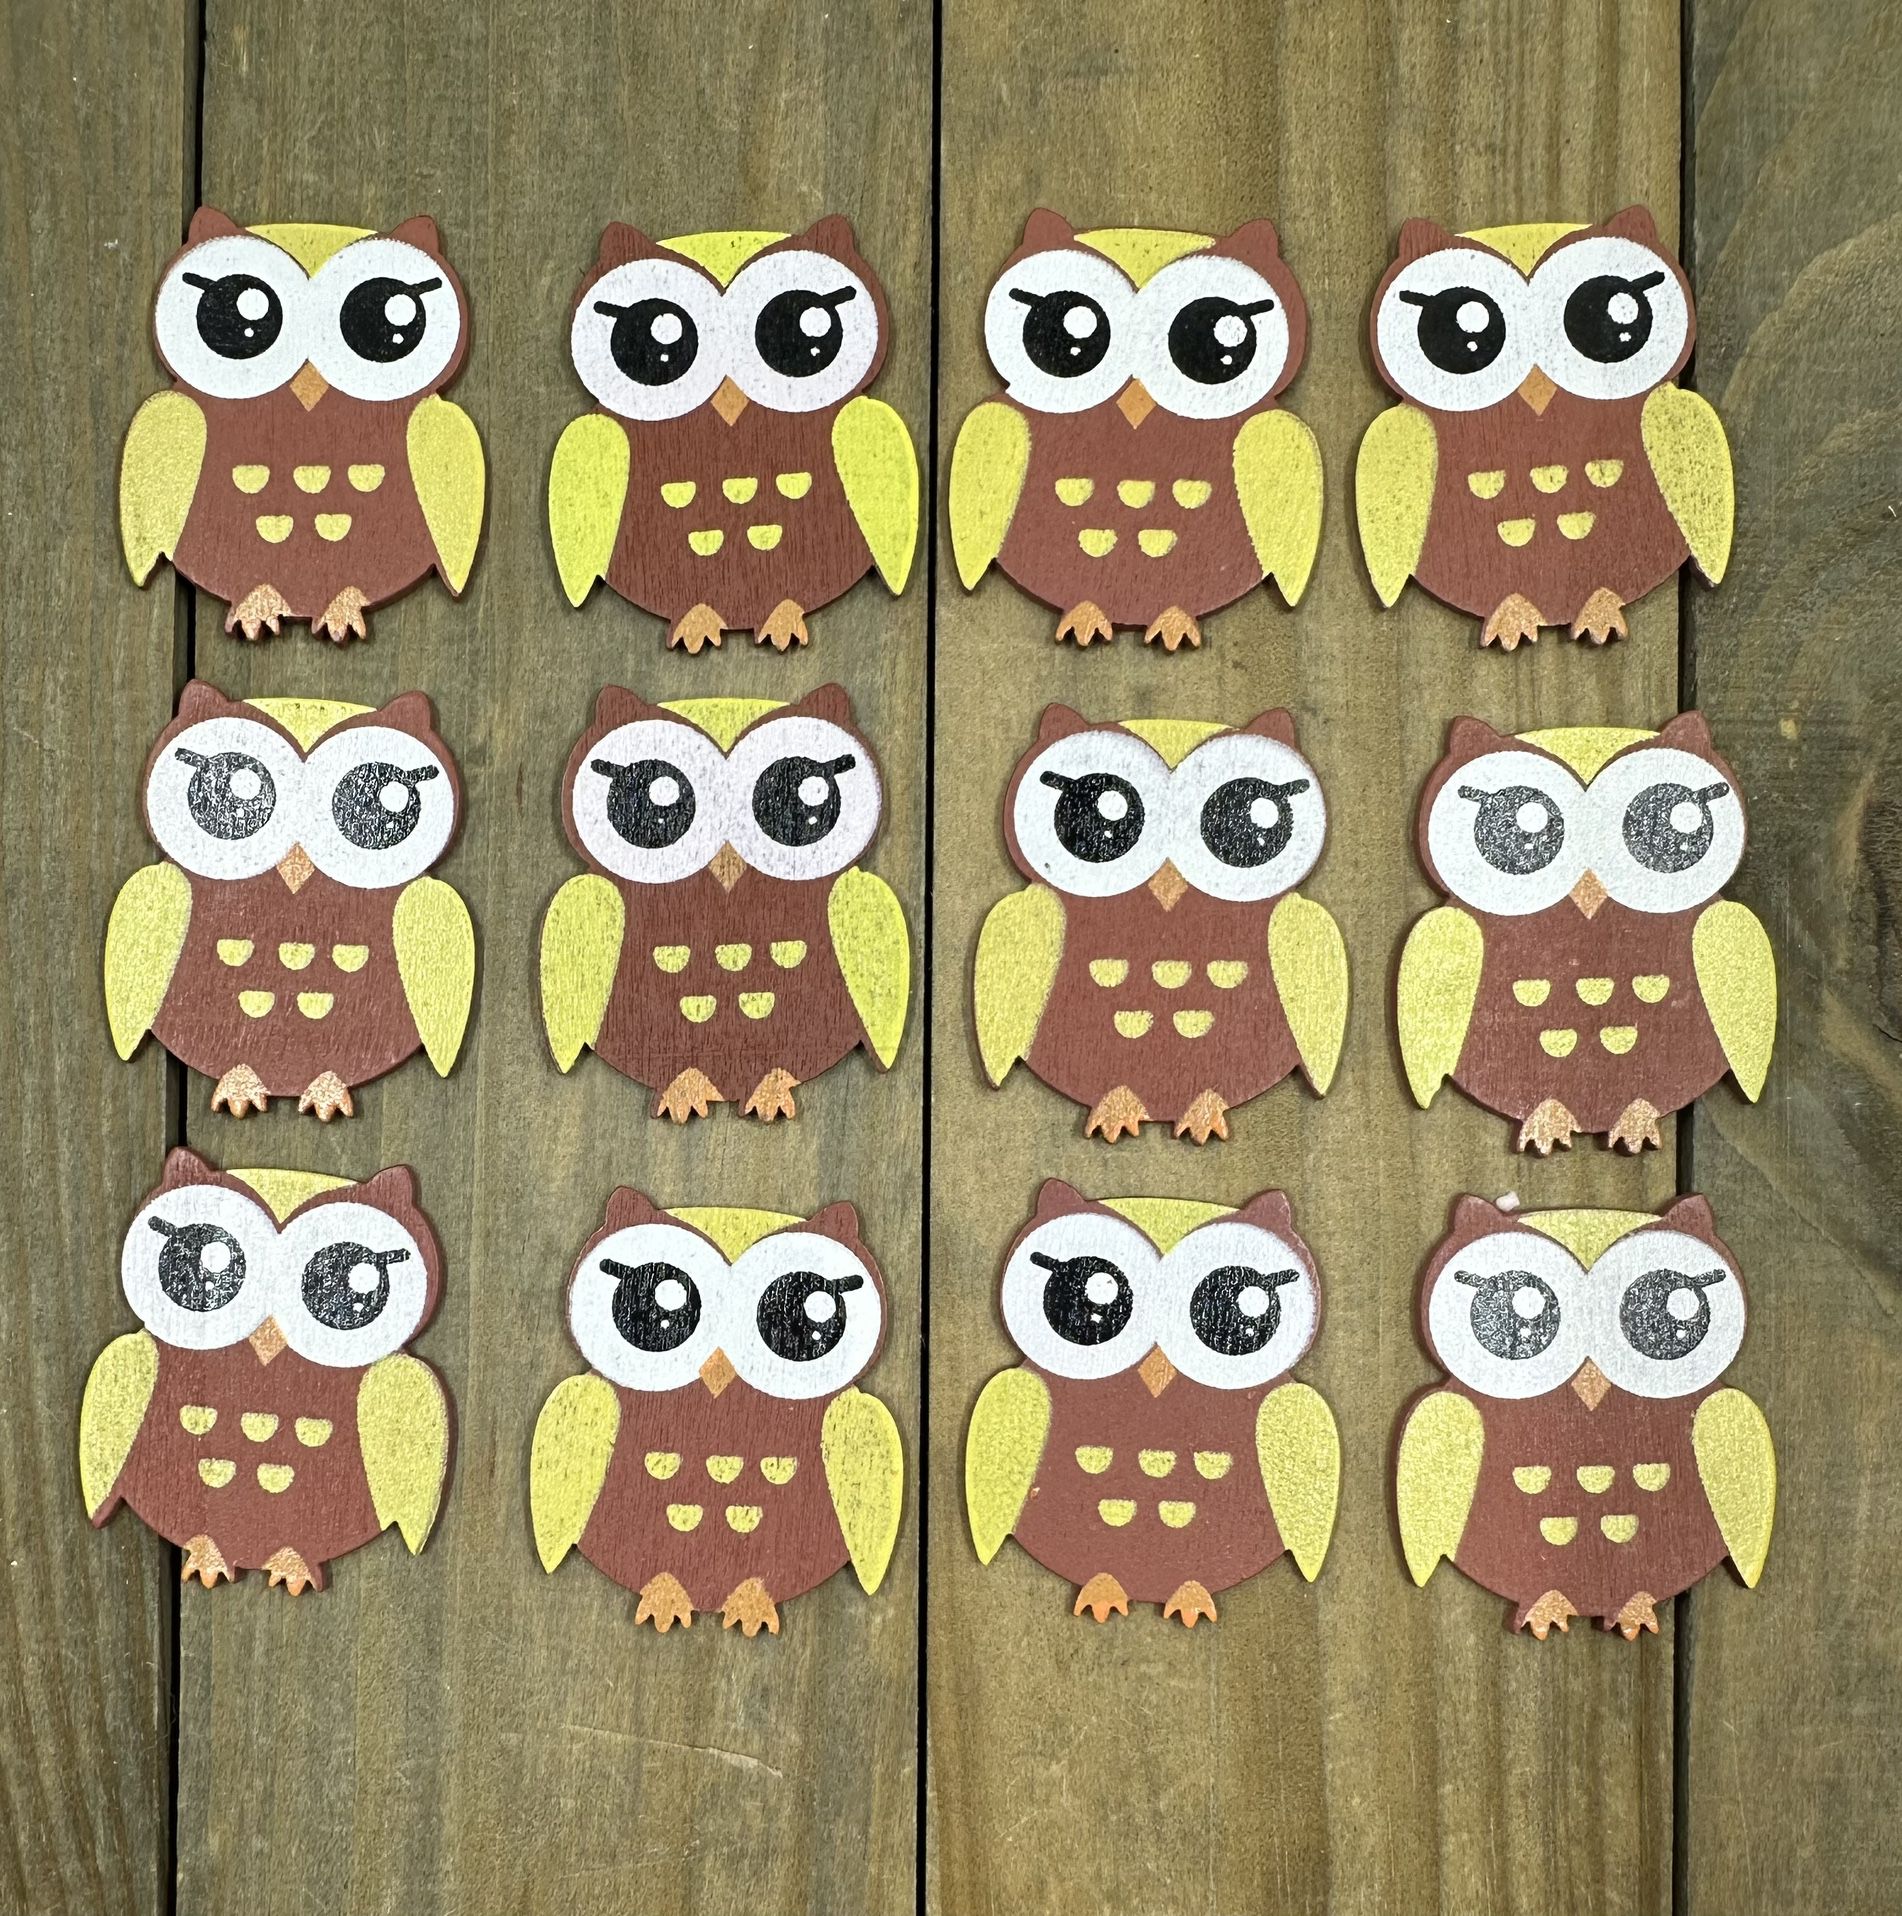 Owls small wood 12 Pcs party favor craft supply for decorations 